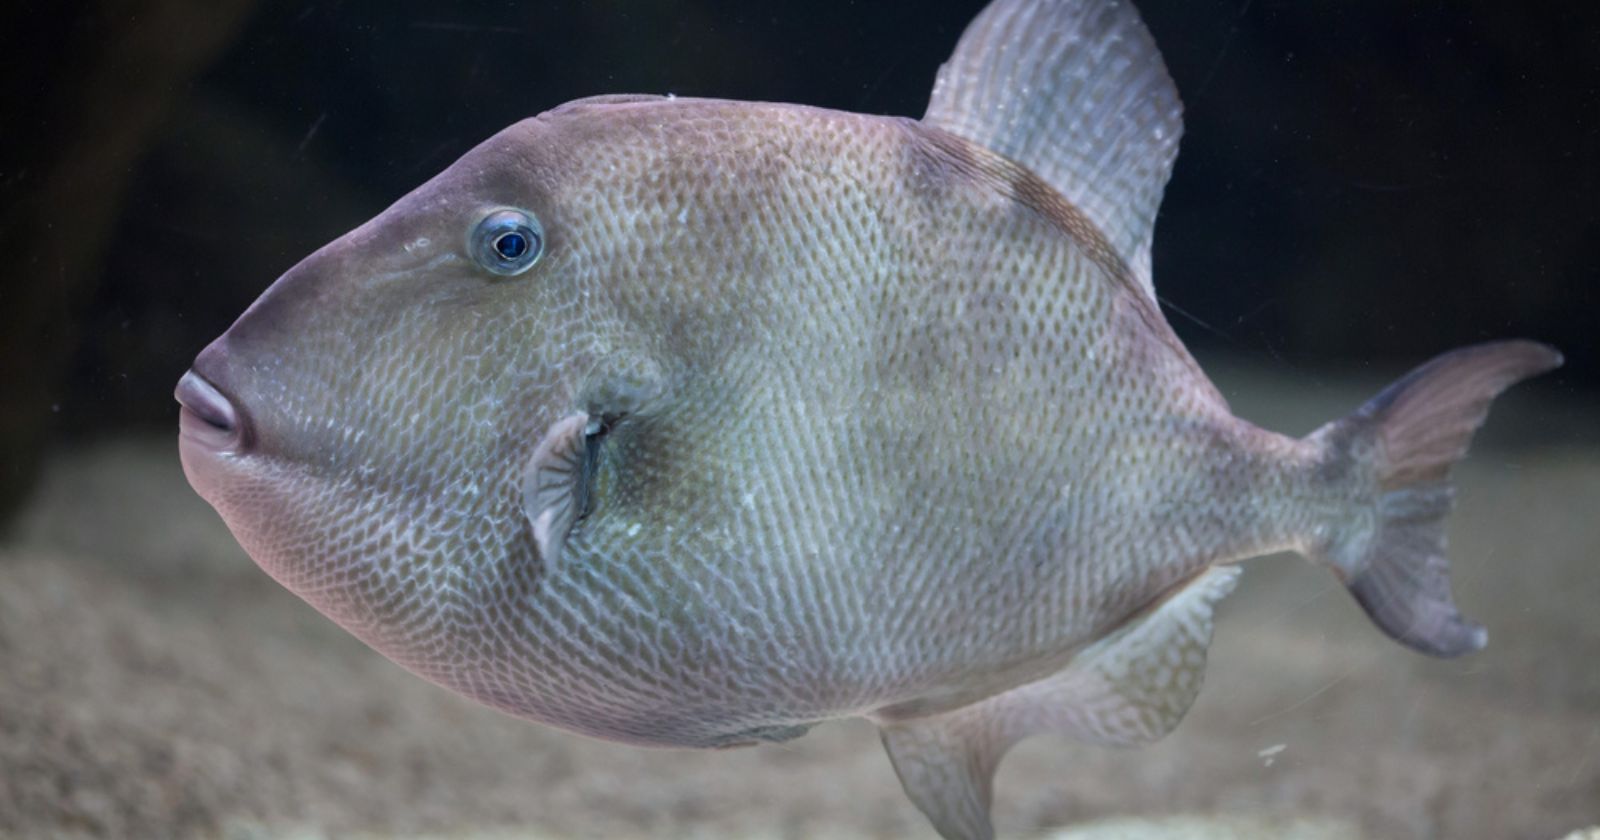 Summer vacation: what is the triggerfish, the fish that attacks swimmer's legs?